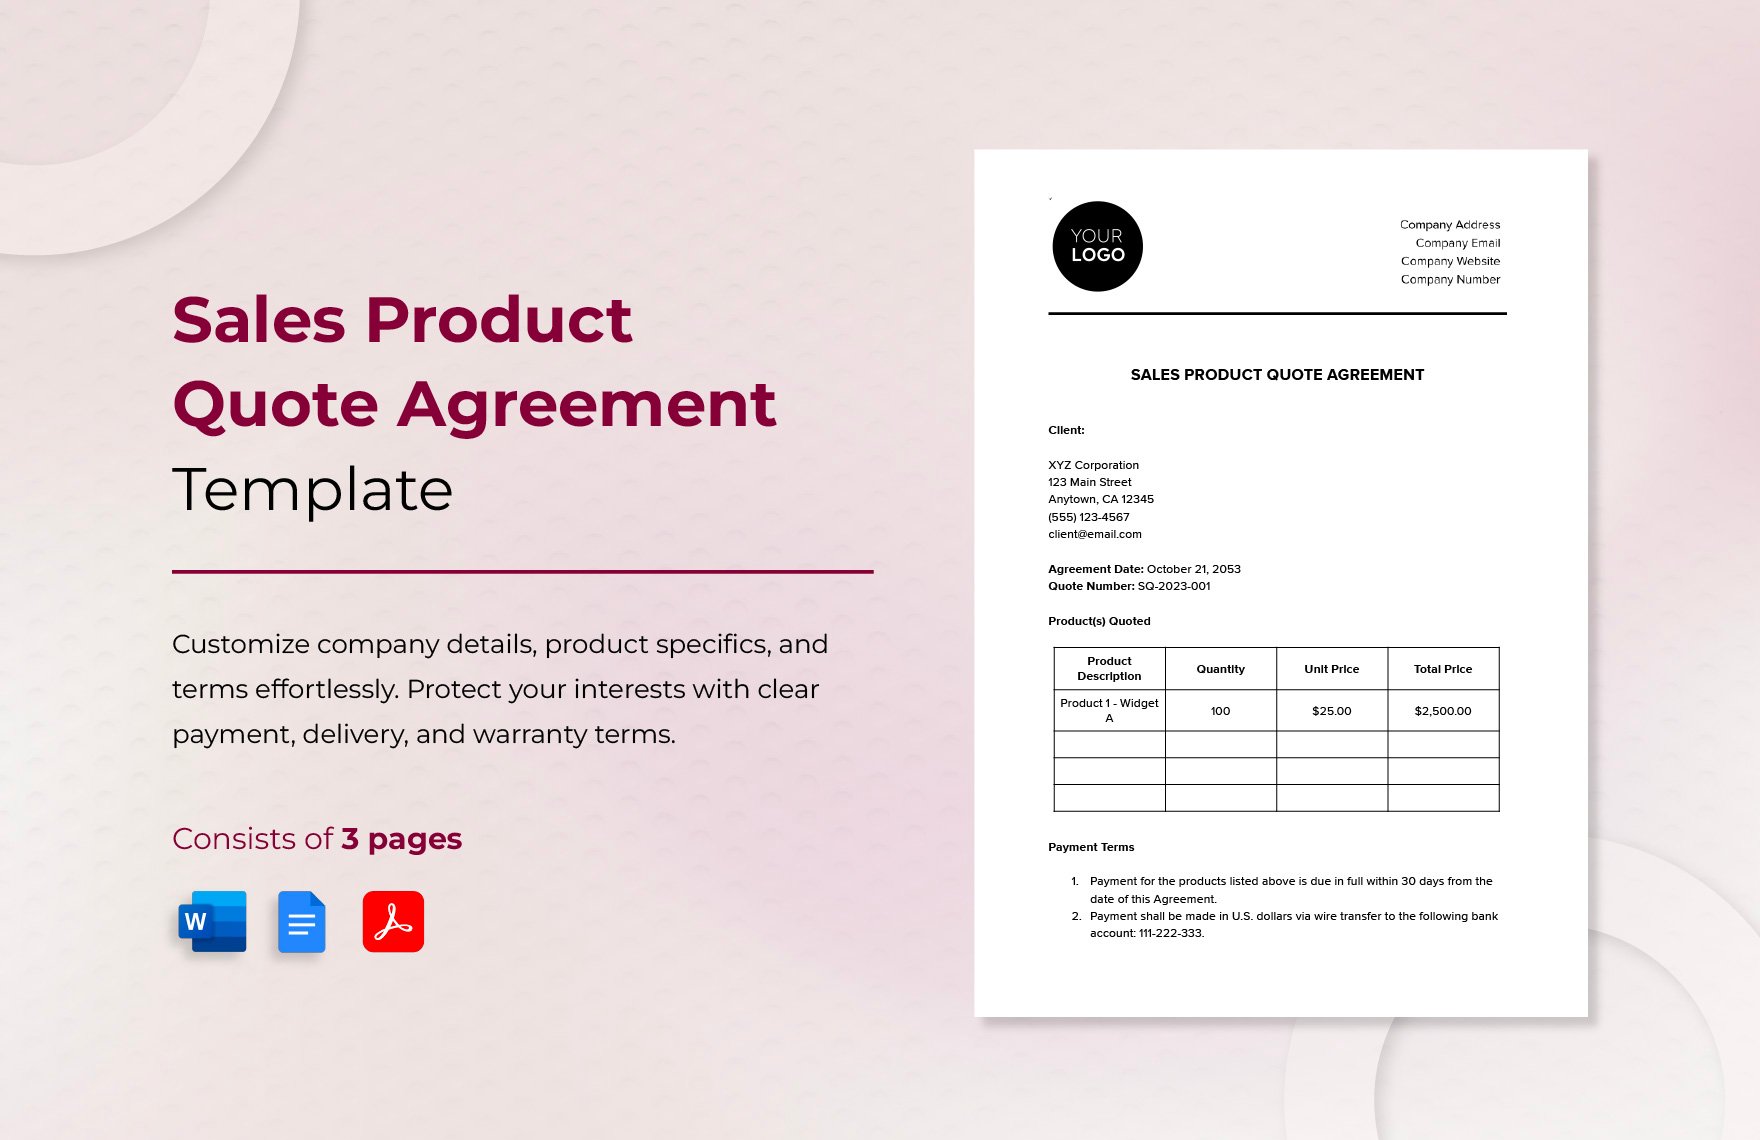 Sales Product Quote Agreement Template in Word, Google Docs, PDF